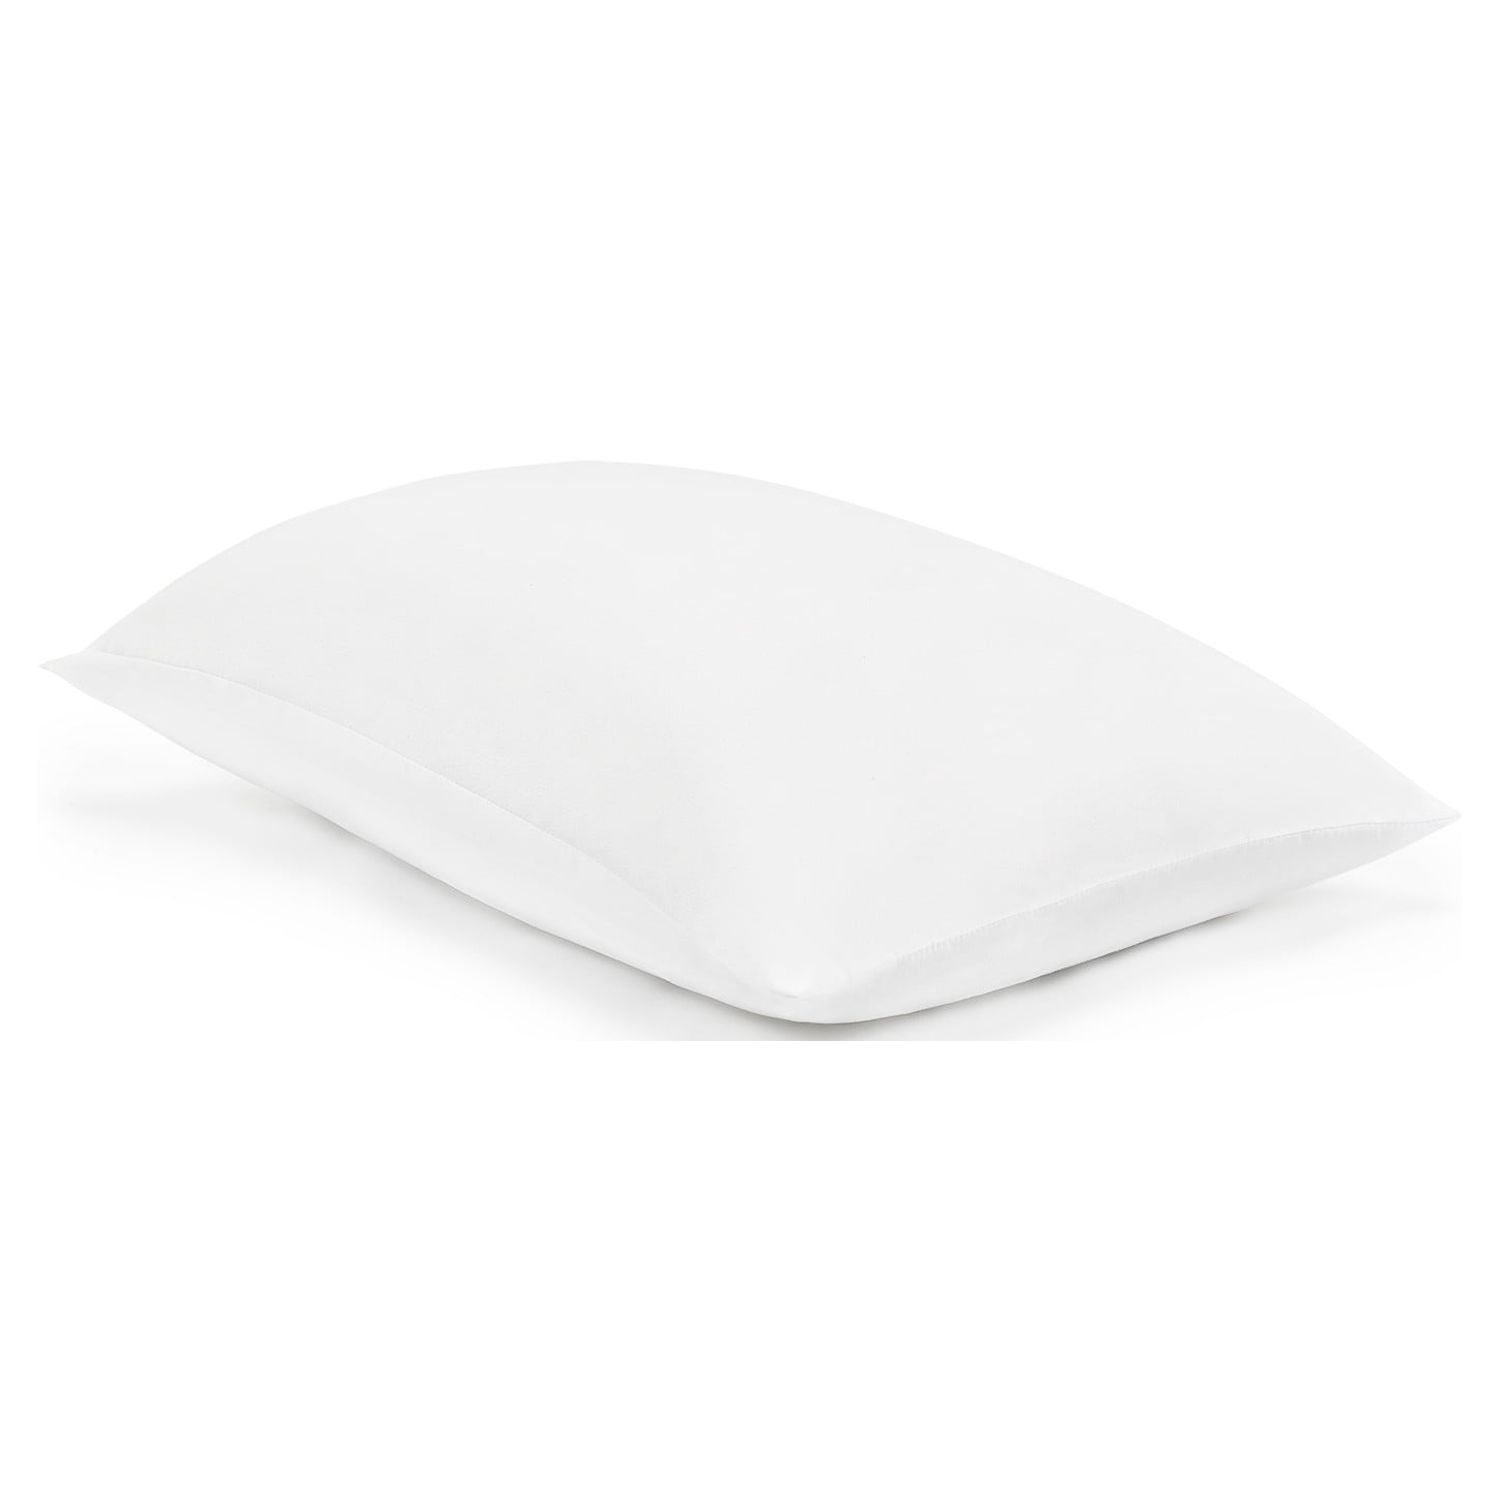 Mainstays Travel Pillow, 14" X 20", 2 Pack - image 4 of 7